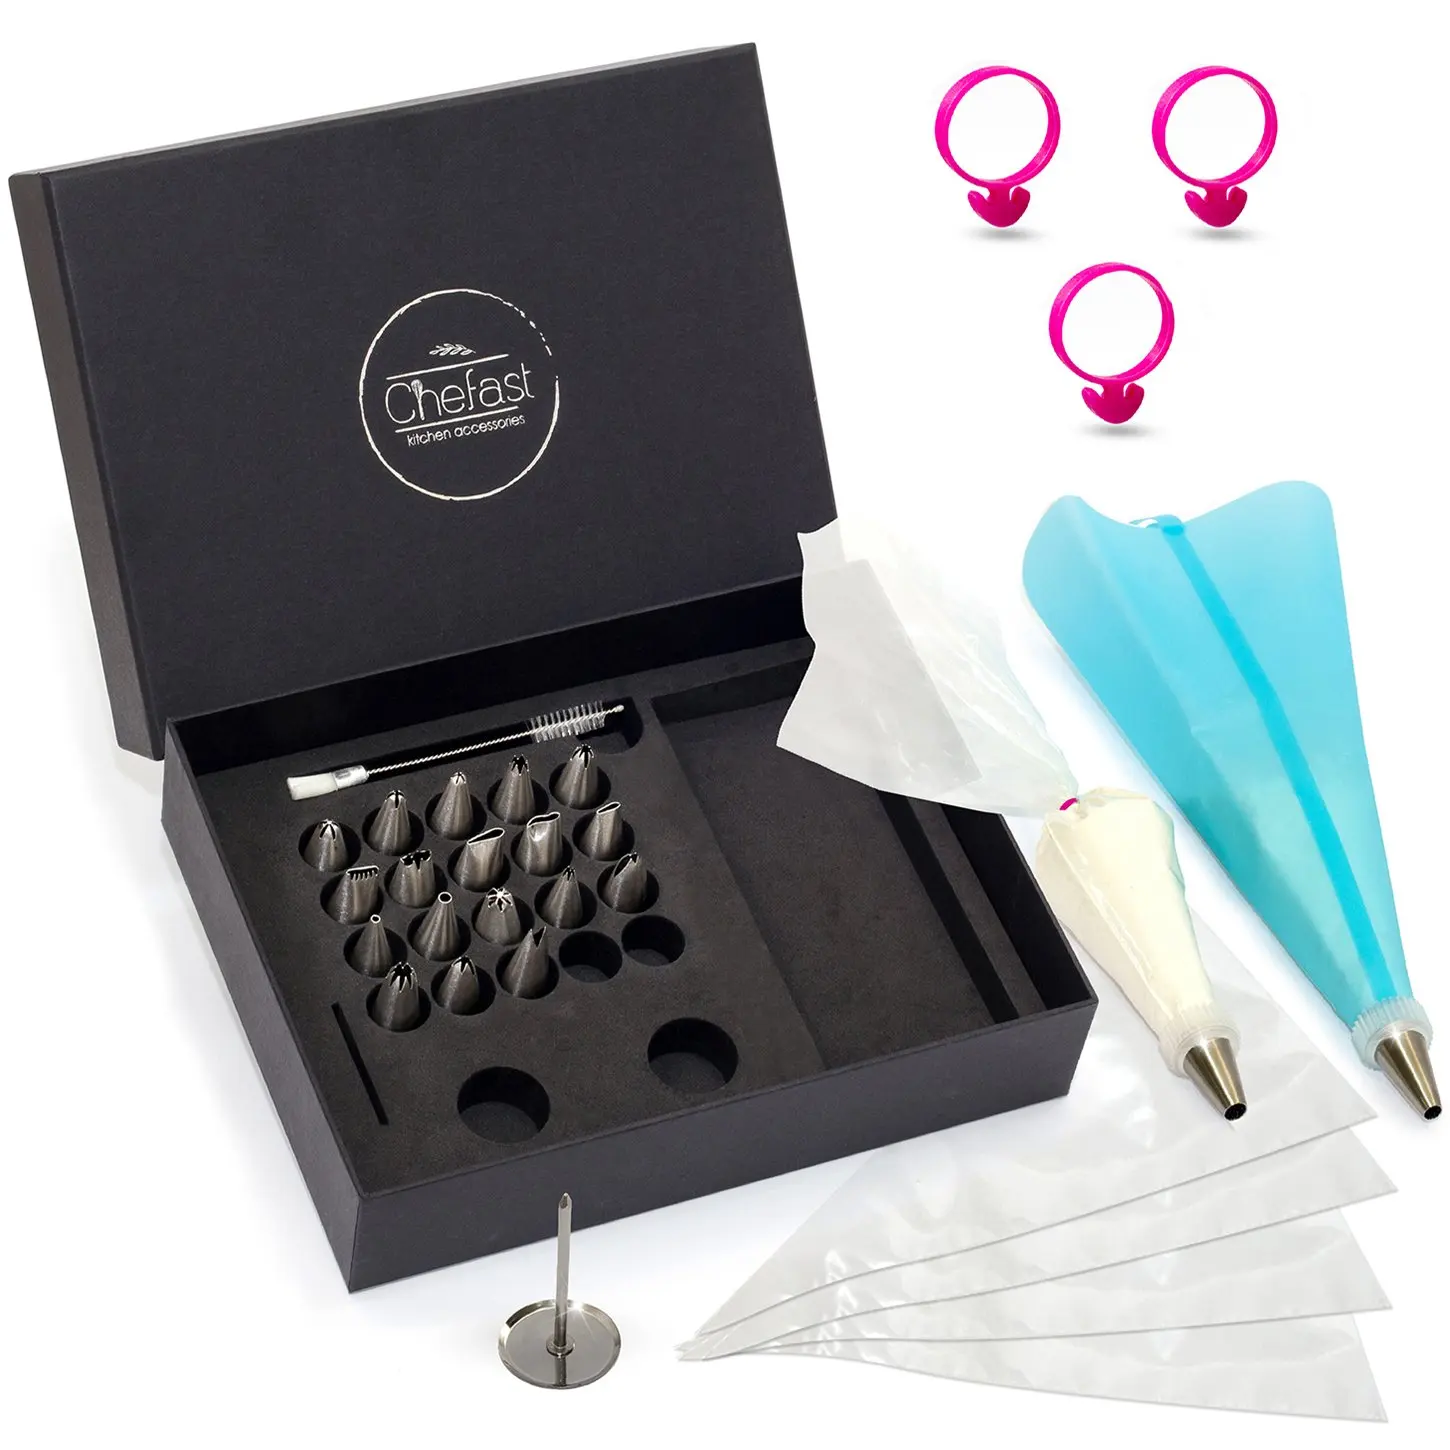 Cake Decorating Tip Set by Chefast - Deluxe Kit of 20 Piping Tips, 5 Frosti...